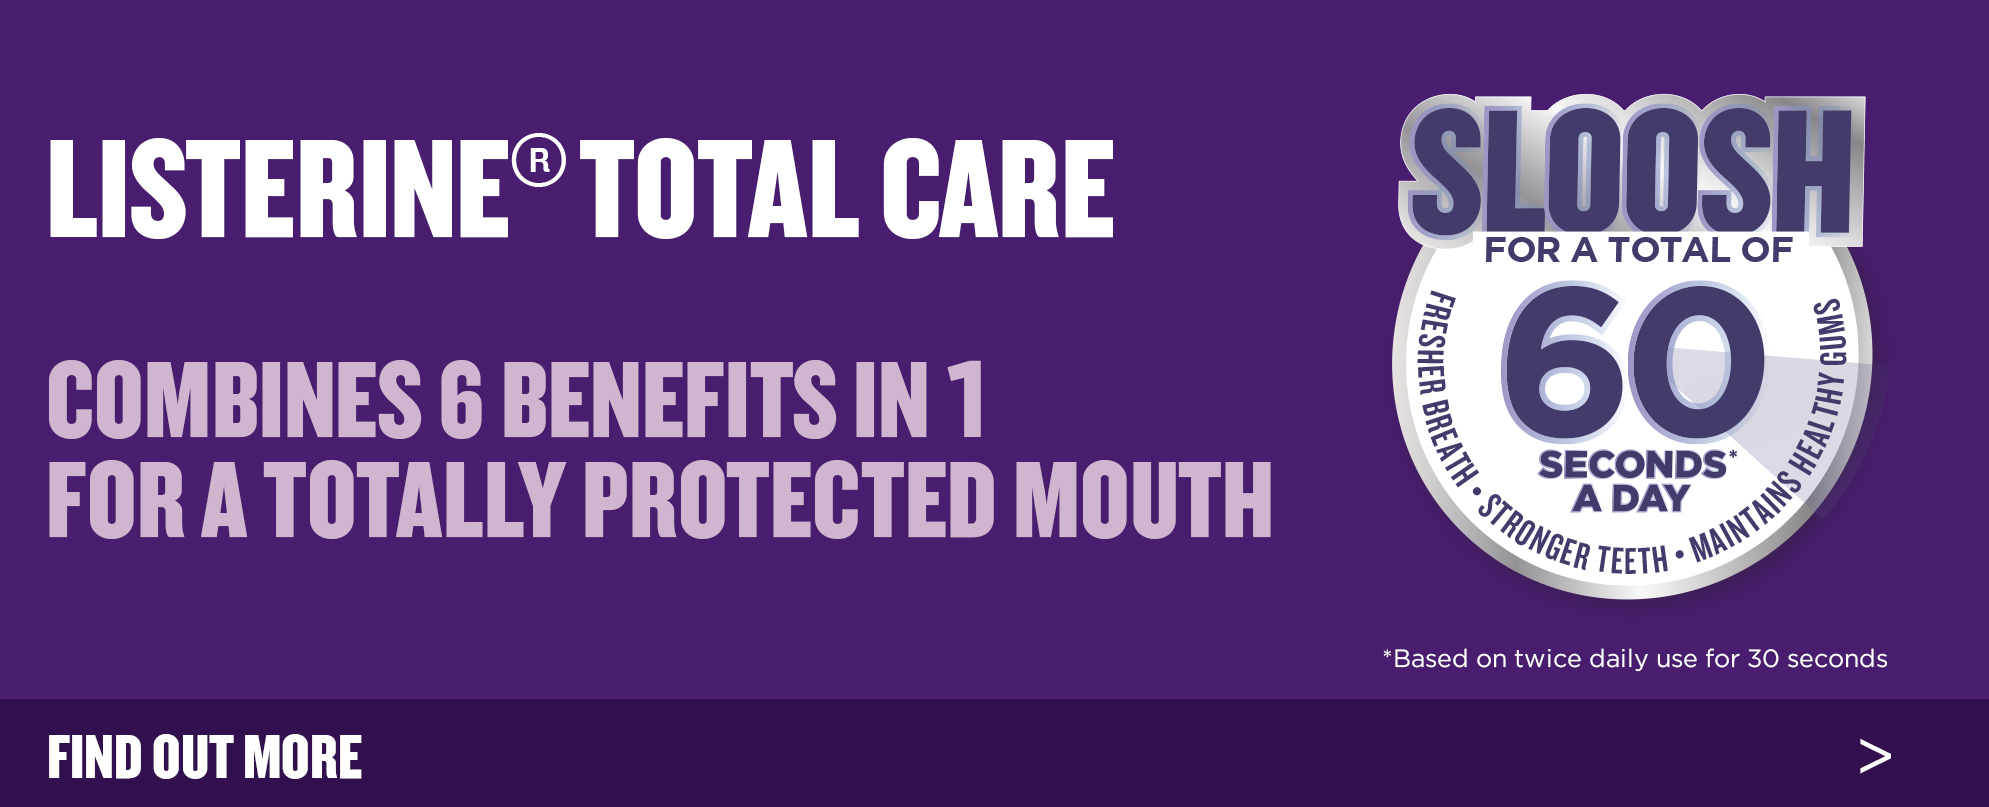 Benefits of Total Care Mouthwash - LISTERINE®